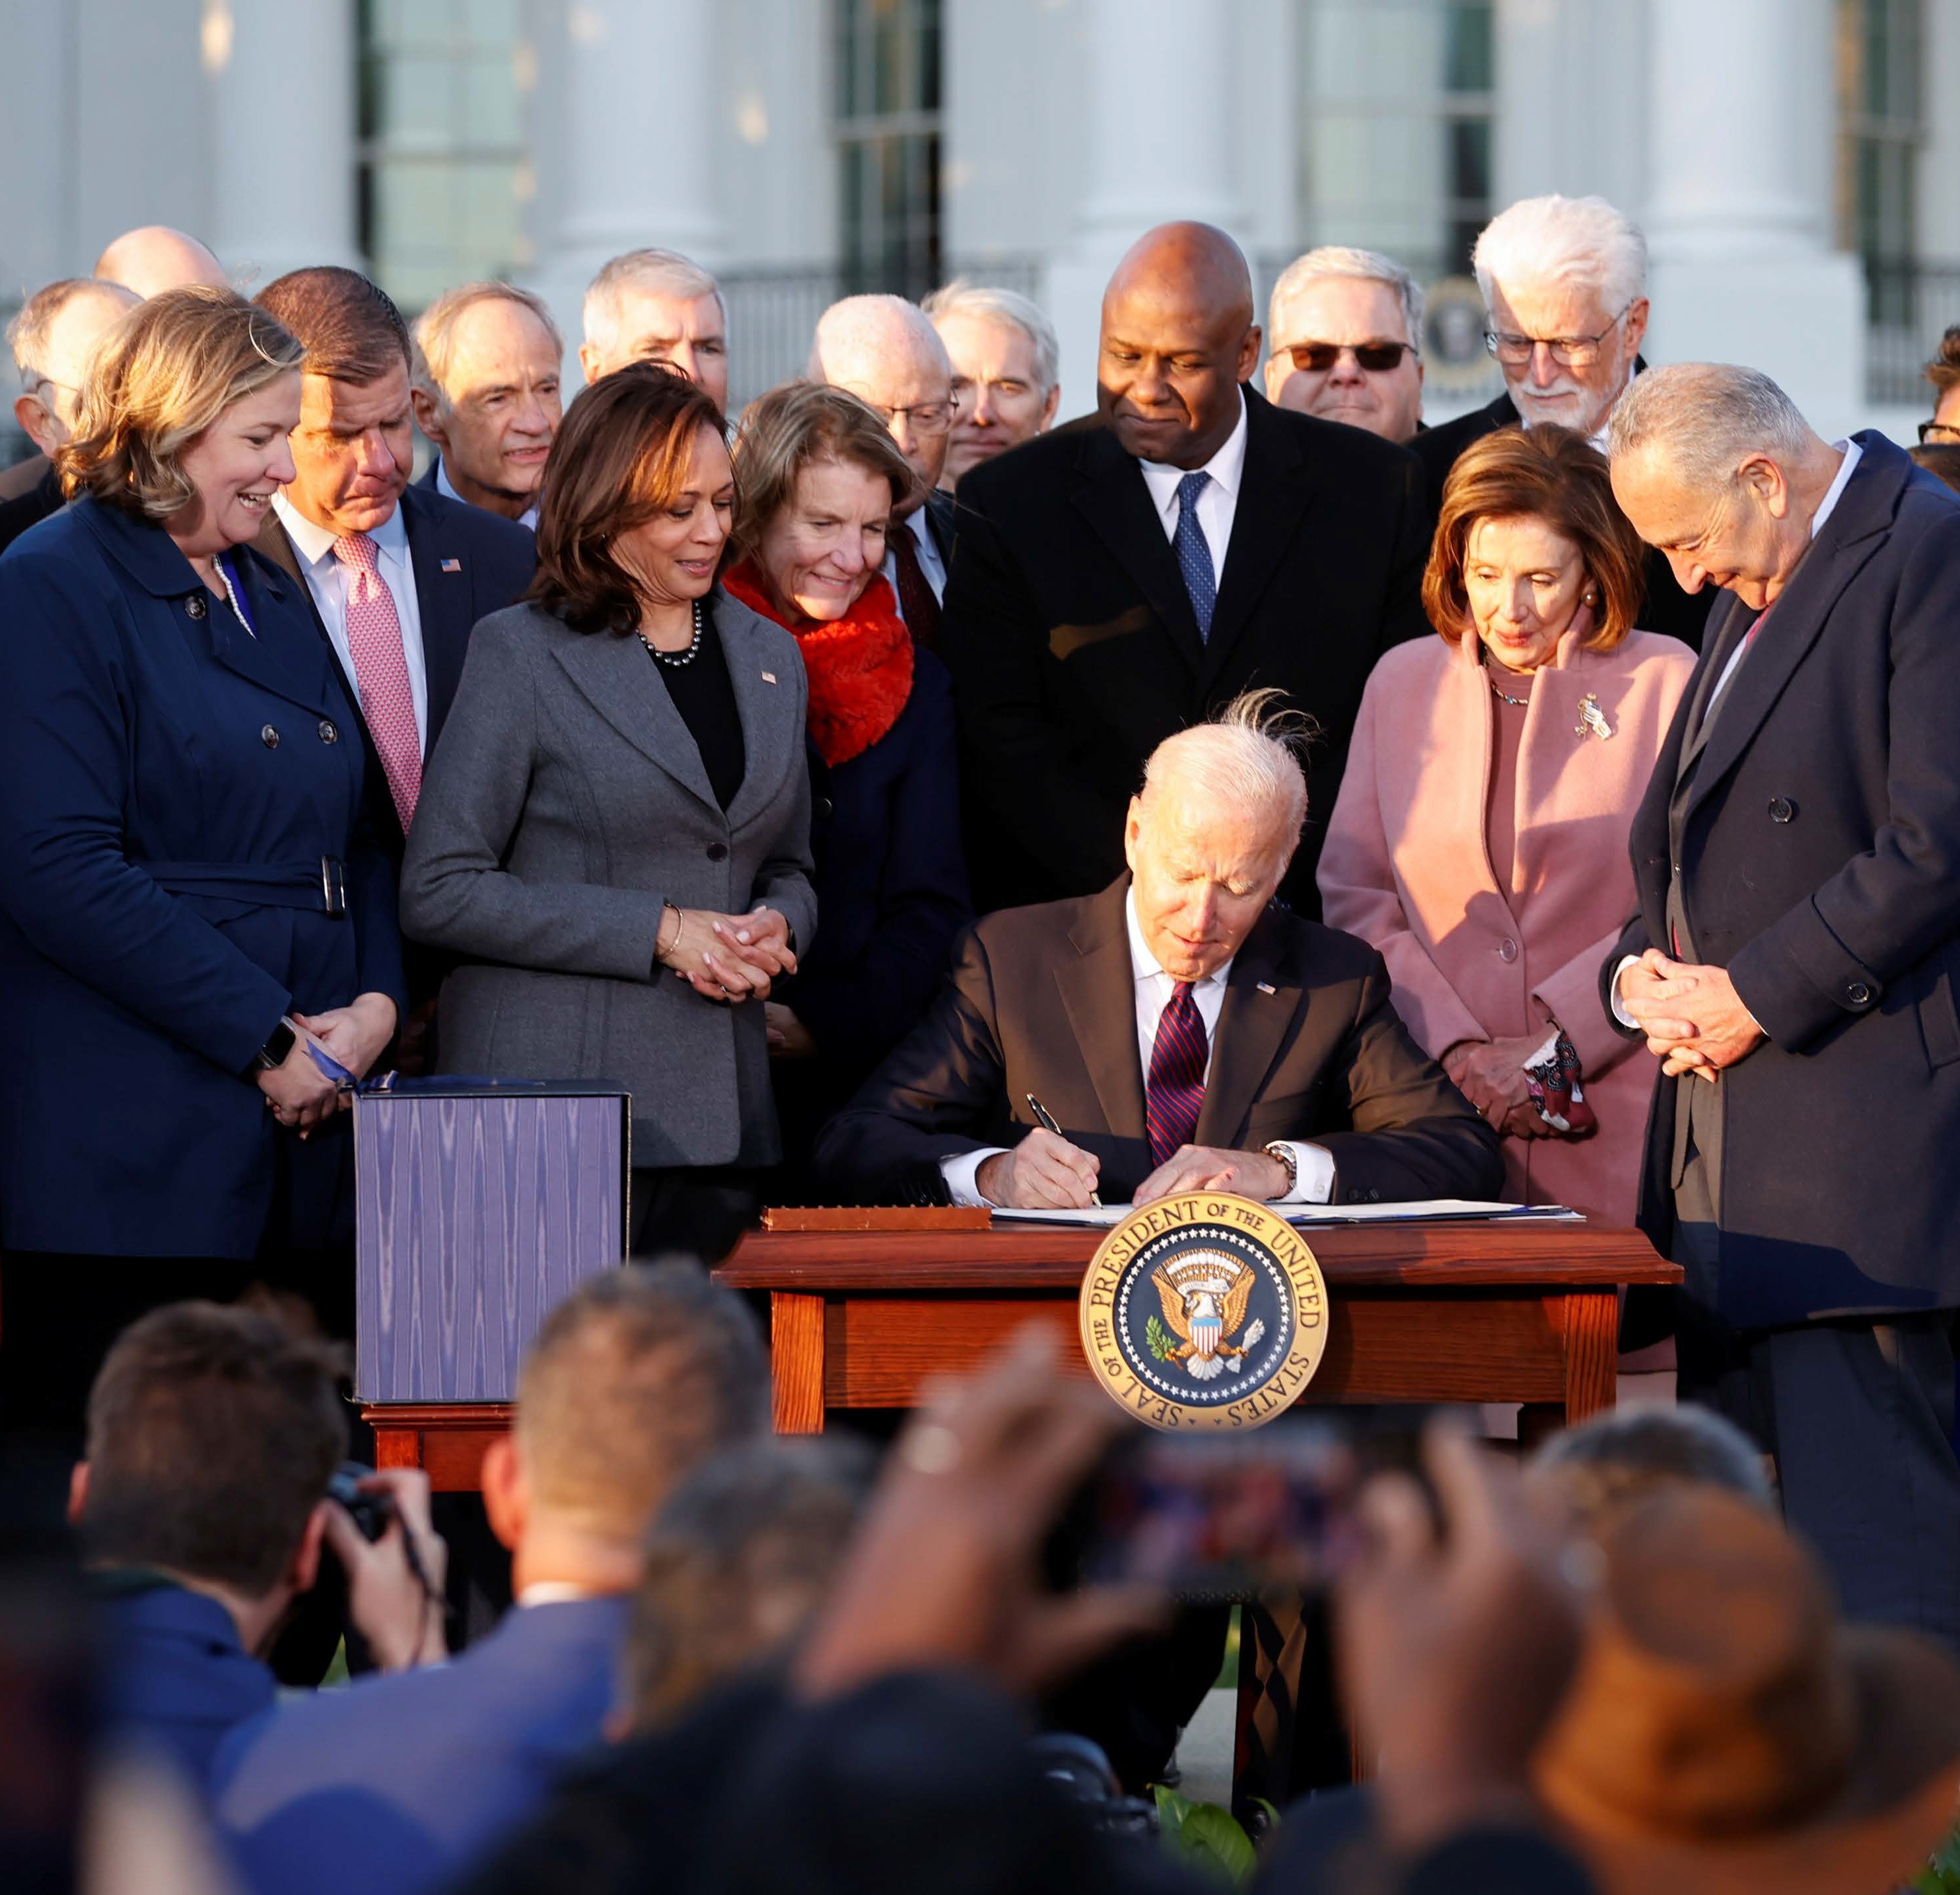 This image shows President Biden signing a bill surrounded by lawmakers and the Vice President. 